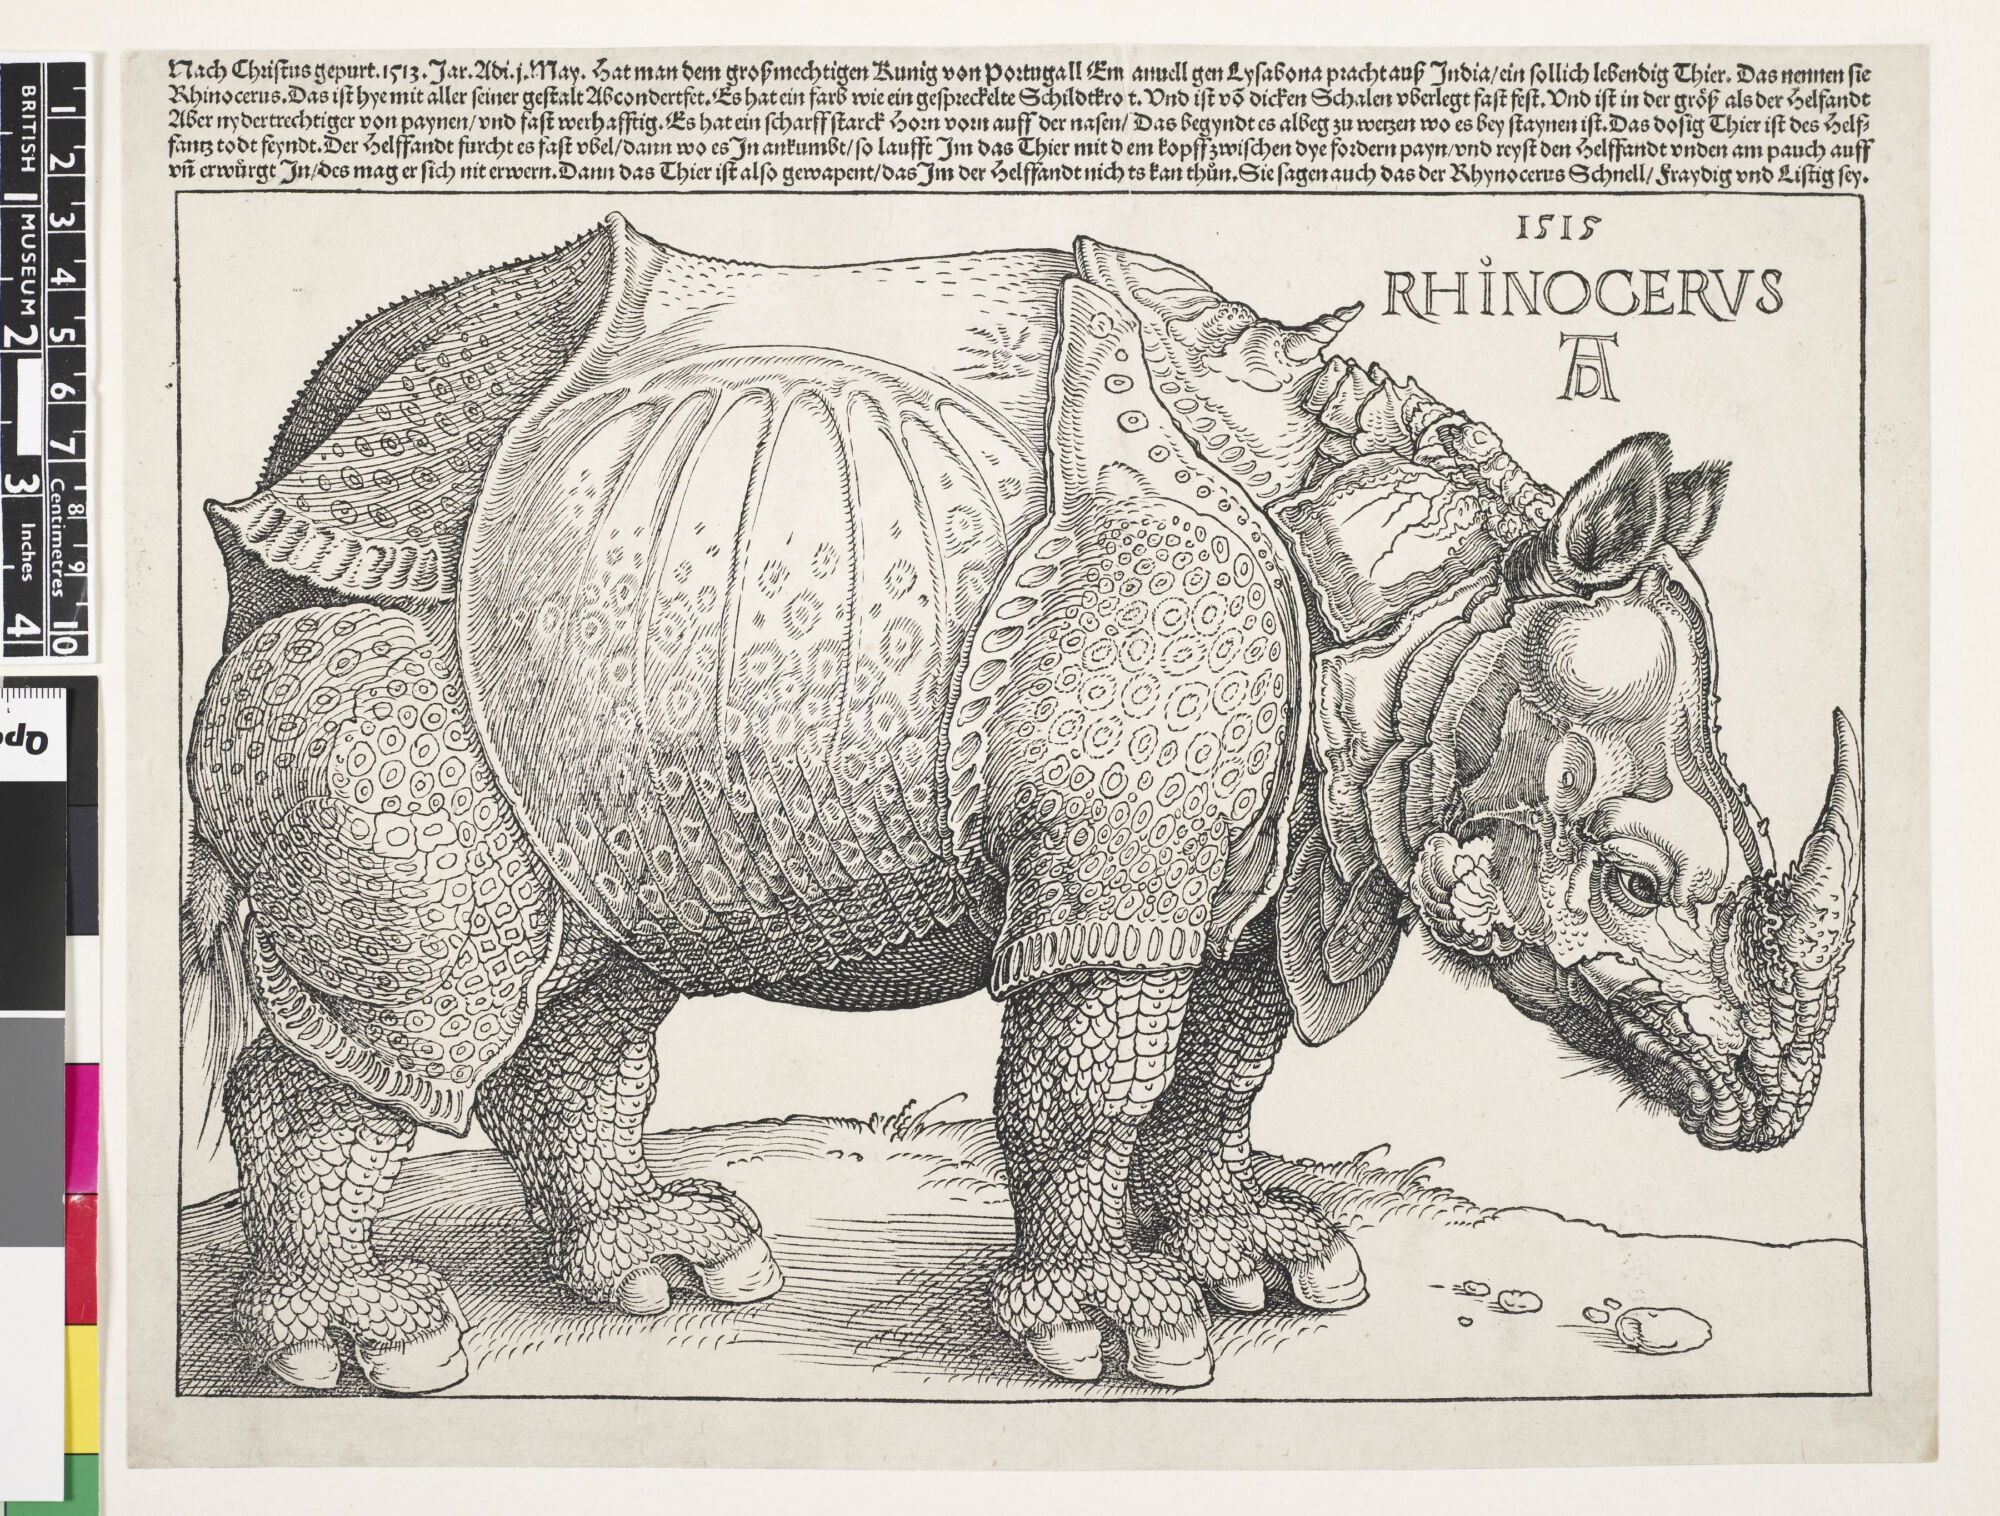 The Wick - The Rhinoceros', Albrecht Durer, Germany, c.1515 © The Trustees of the British Museum